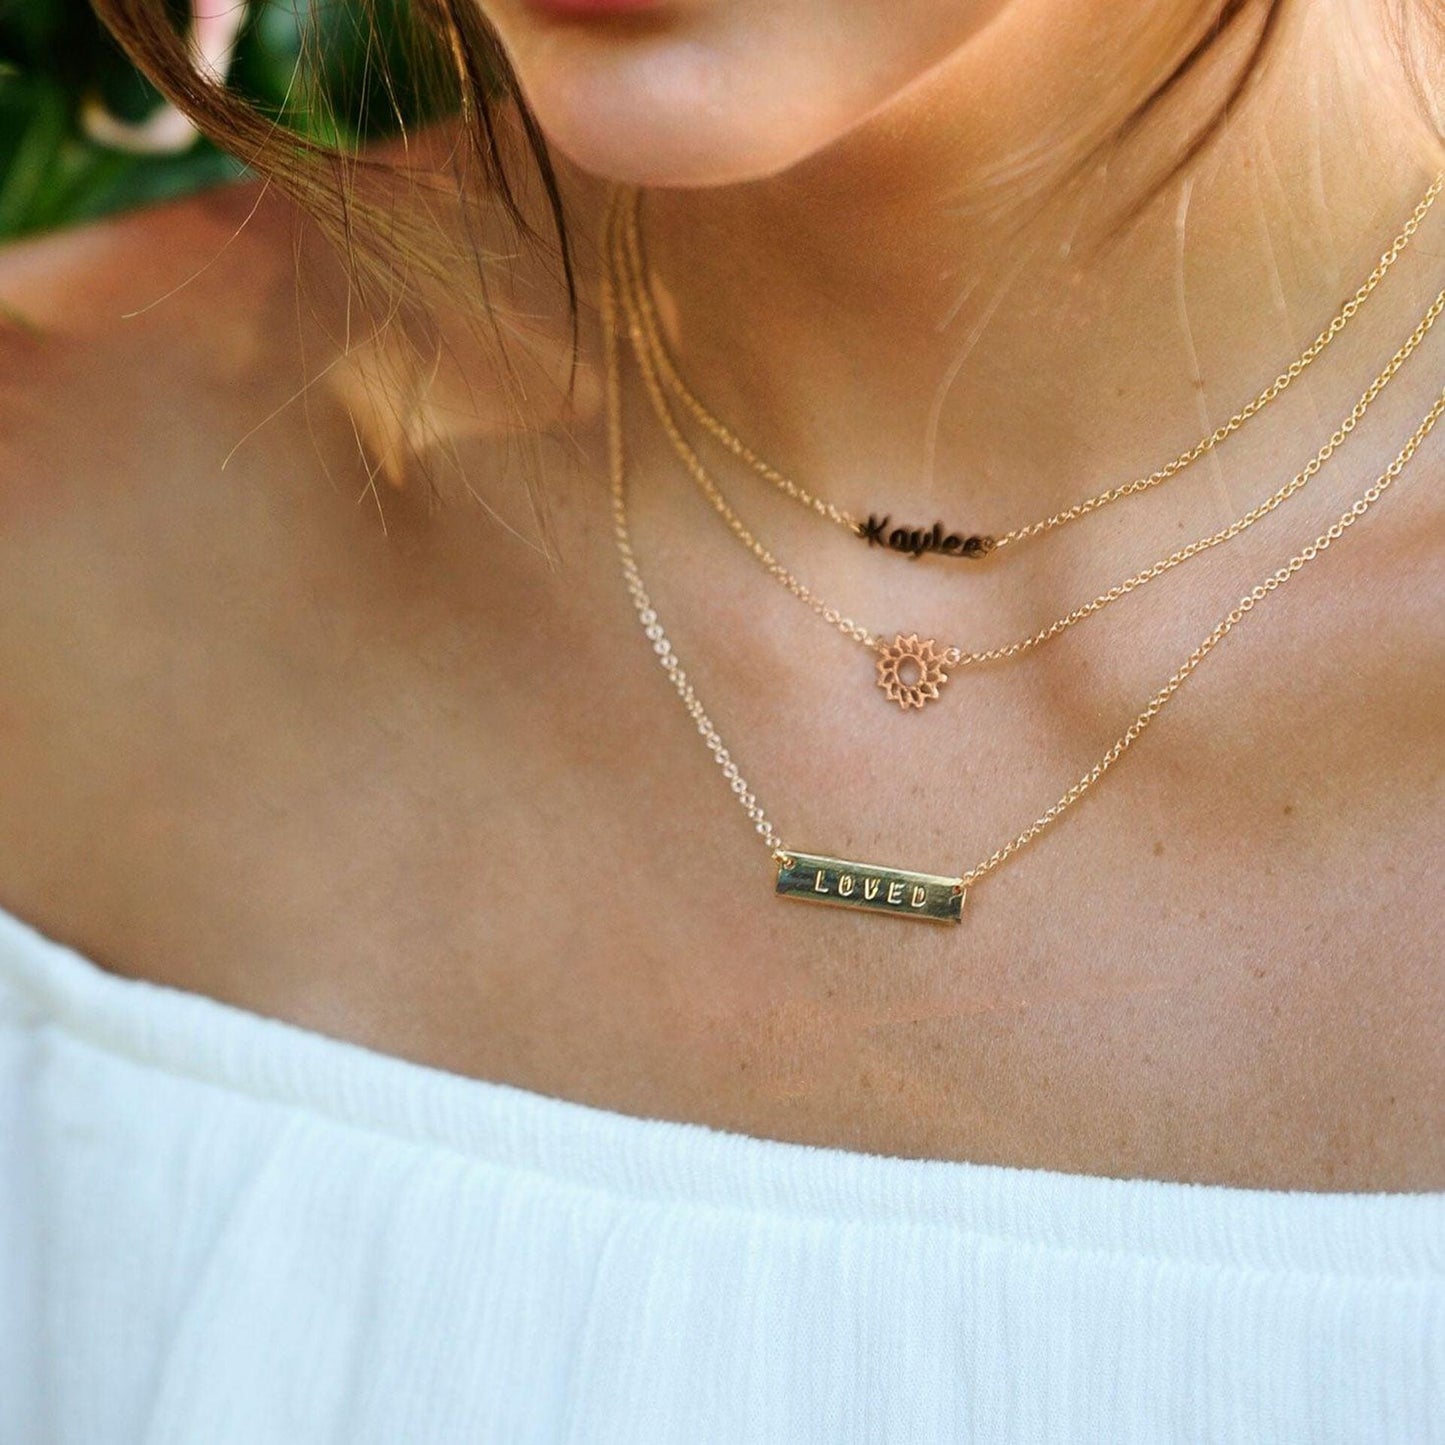 Lumiela Personalized Nameplate Zoe Necklace in Gold Tone